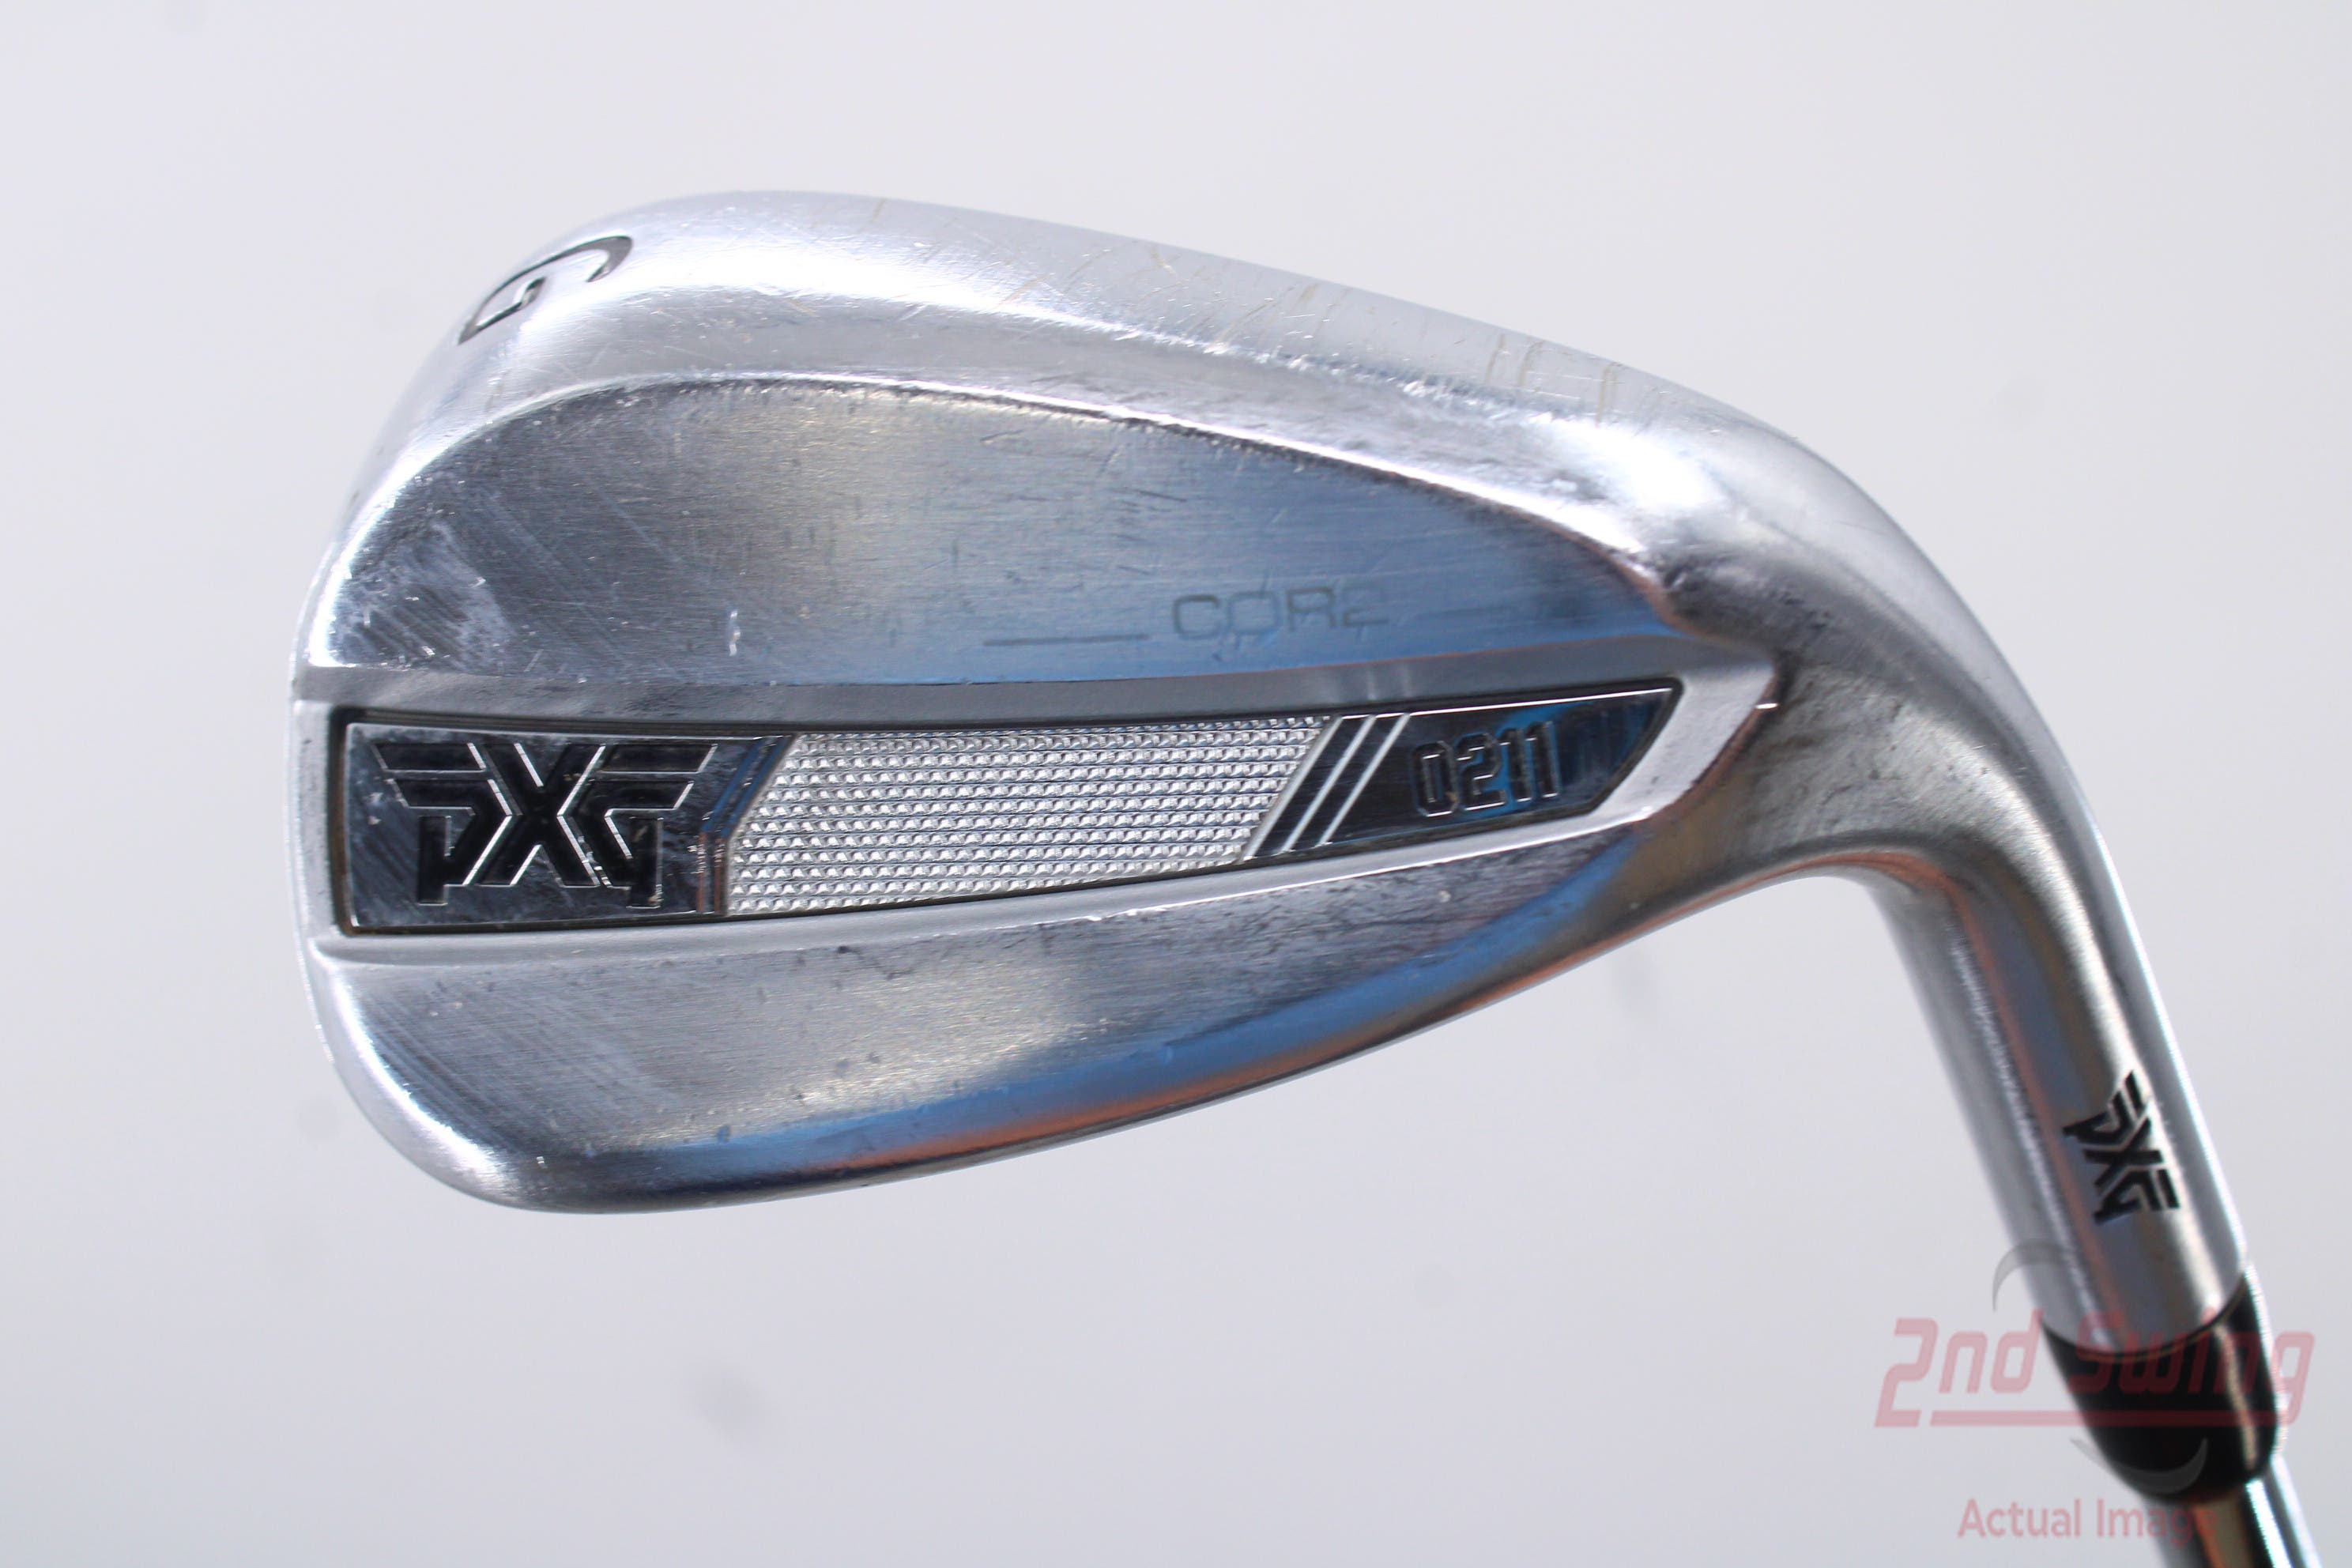 PXG 0211 XCOR2 Chrome Wedge (A-32329991605) 2nd Swing Golf